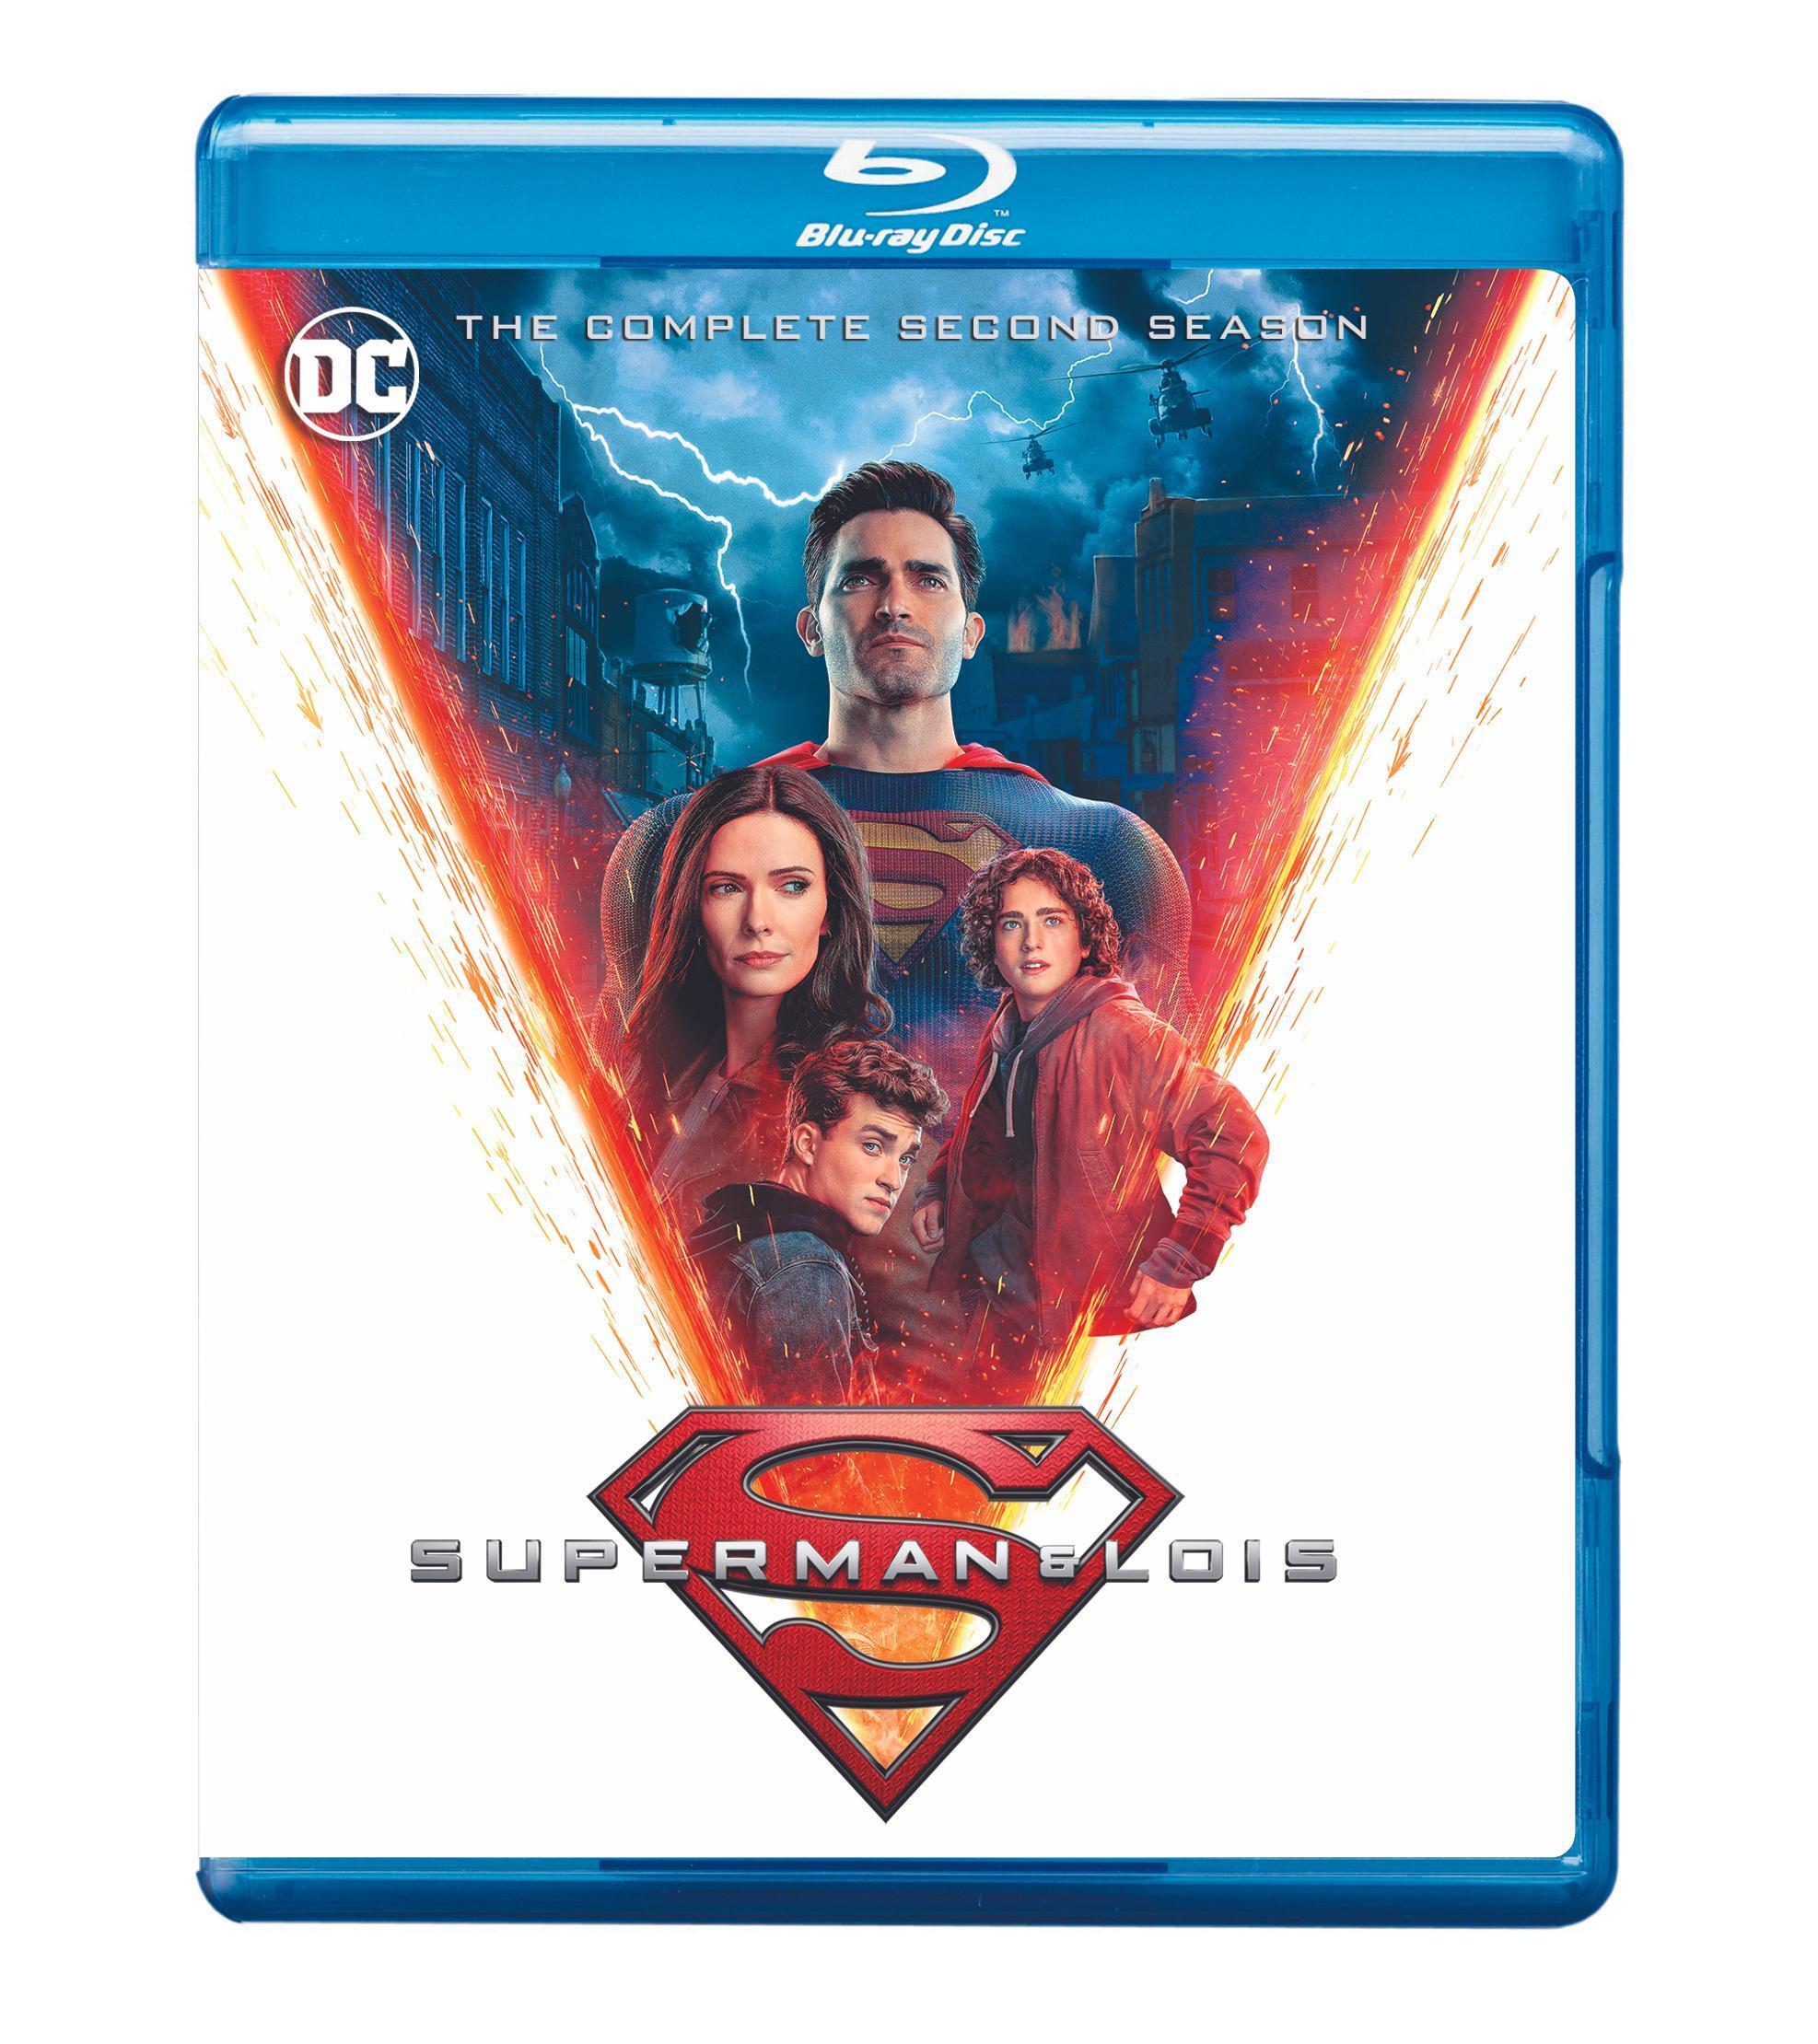 Superman & Lois: The Complete Second Season (Box Set) - Blu-ray [ 2022 ]  - Drama Television On Blu-ray - TV Shows On GRUV